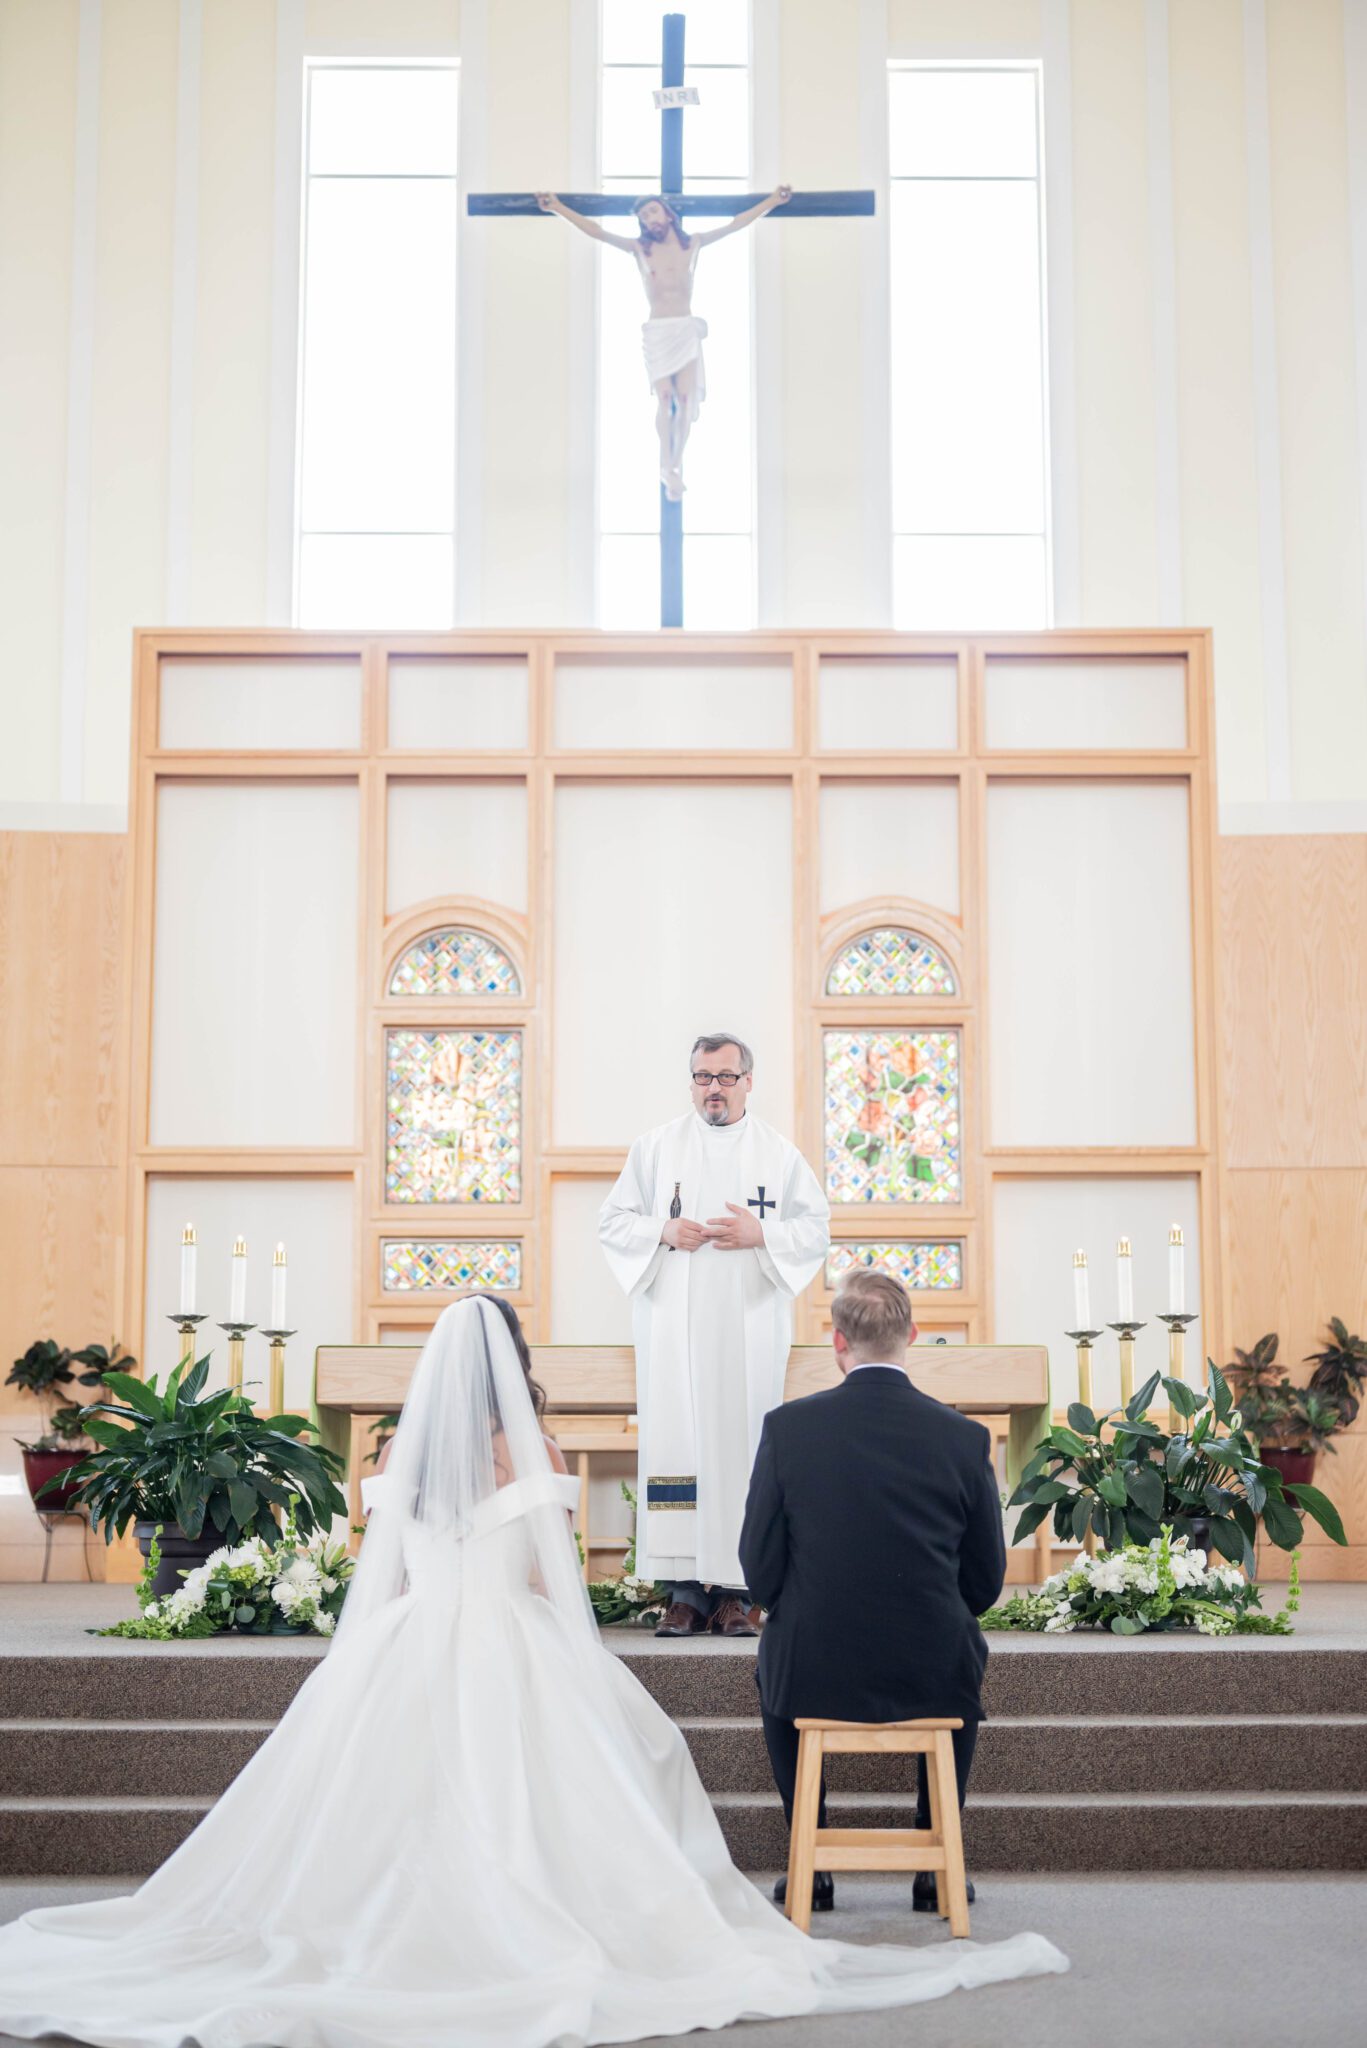 Couple sits in front of the ceremony altar at a Catholic church, bride in elegant long gown with cathedral veil.